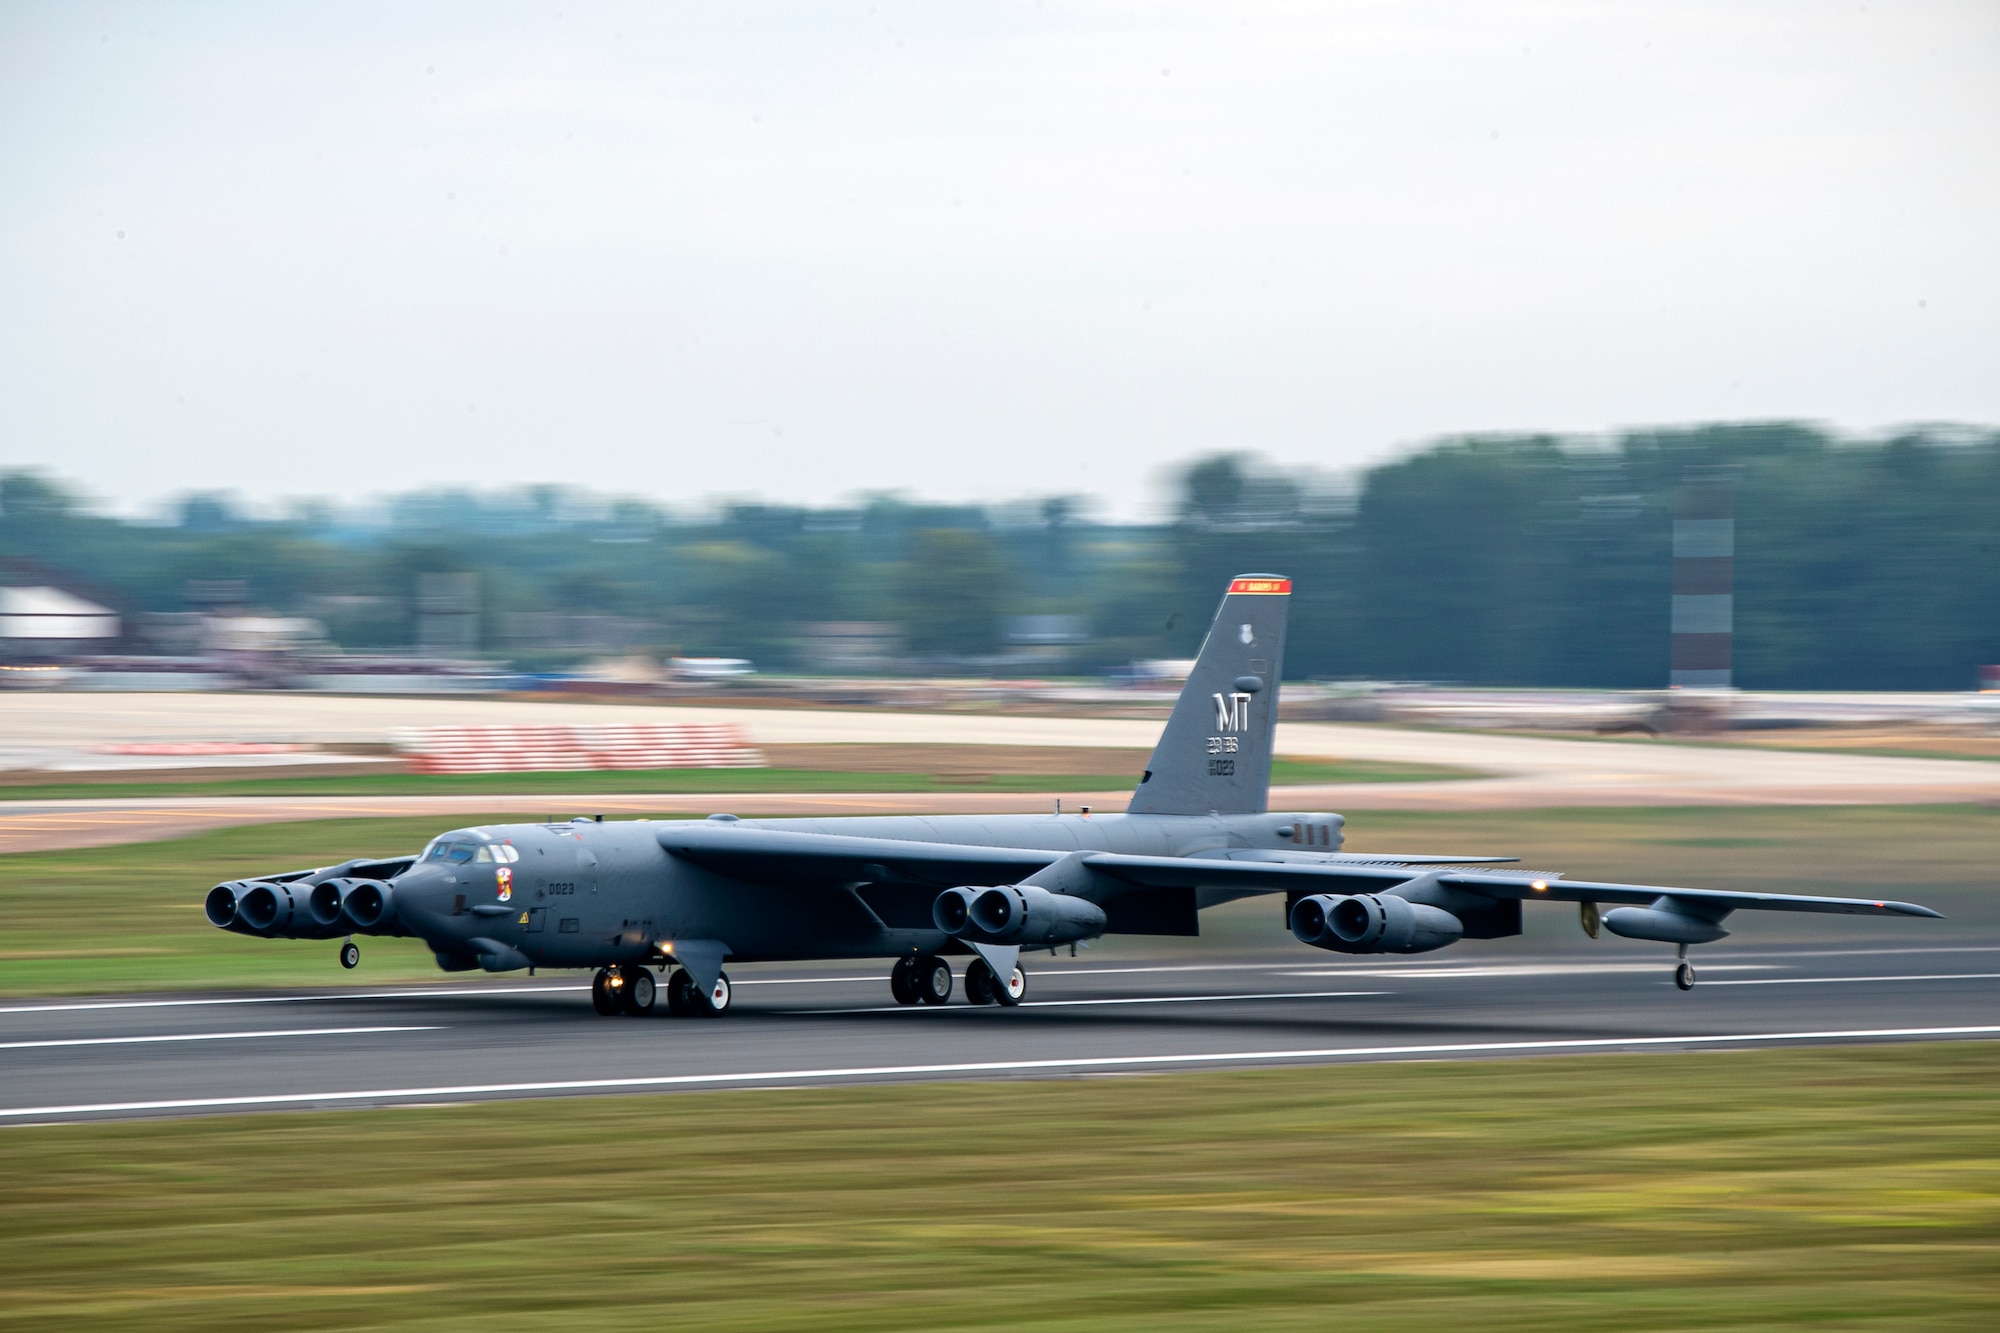 A B-52 Stratofortress aircraft assigned to the 23rd Expeditionary Bomb Squadron takes off at RAF Fairford, United Kingdom, Sept. 21, 2022. Strategic bombers contribute to stability in the European theater, they provide a critical role in strategic deterrence. If called upon, U.S. bombers offer a rapid response capability. (U.S. Air Force photo by Staff Sgt. Eugene Oliver)